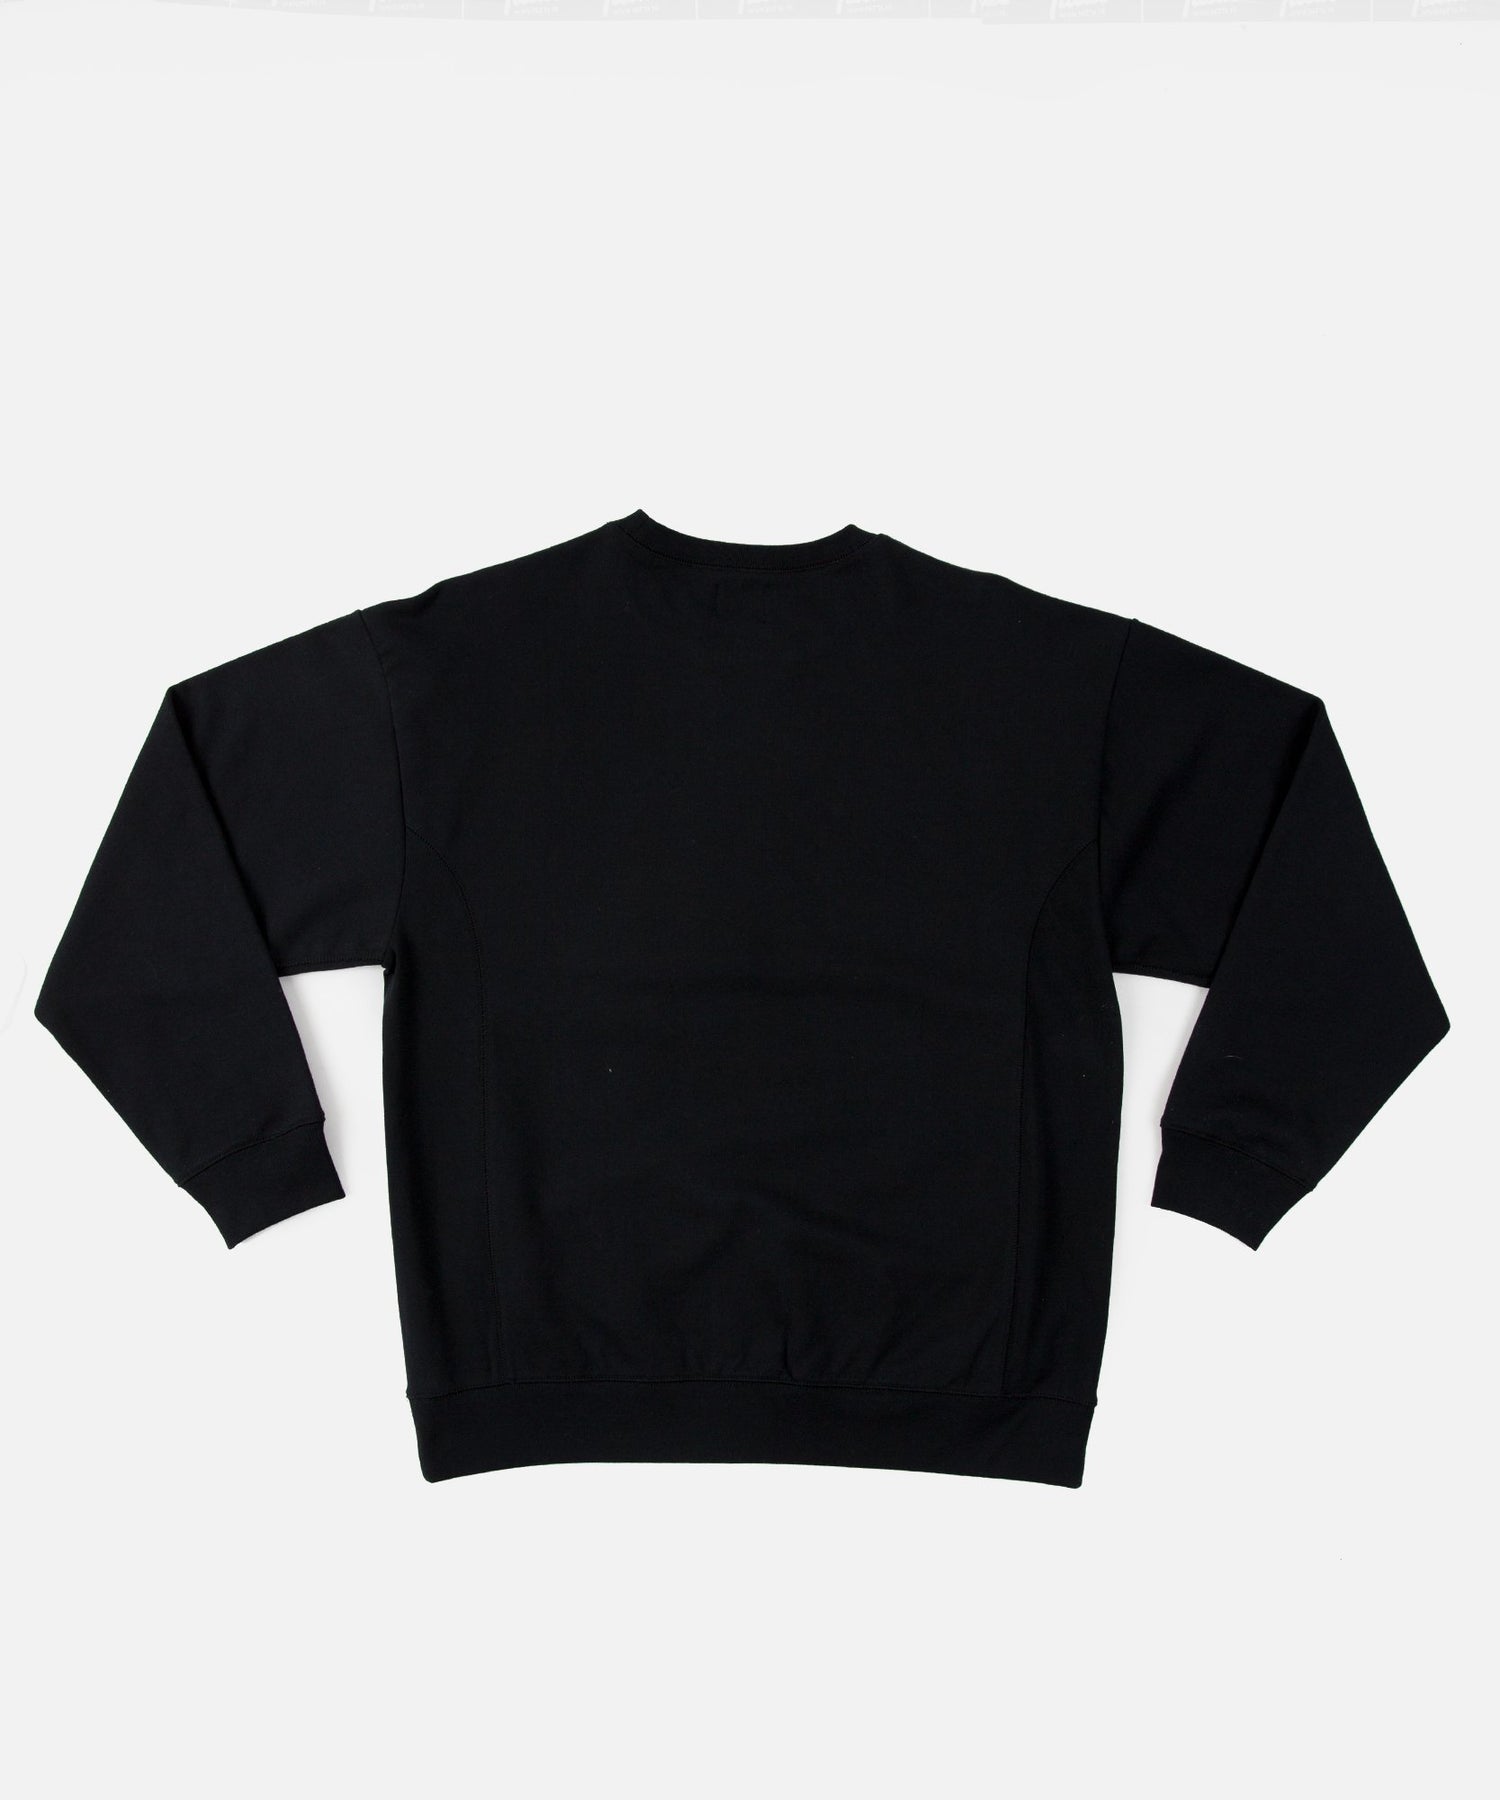 IN-STORE EXCLUSIVE: Patta Amsterdam Chapter Crewneck Sweater (Black)